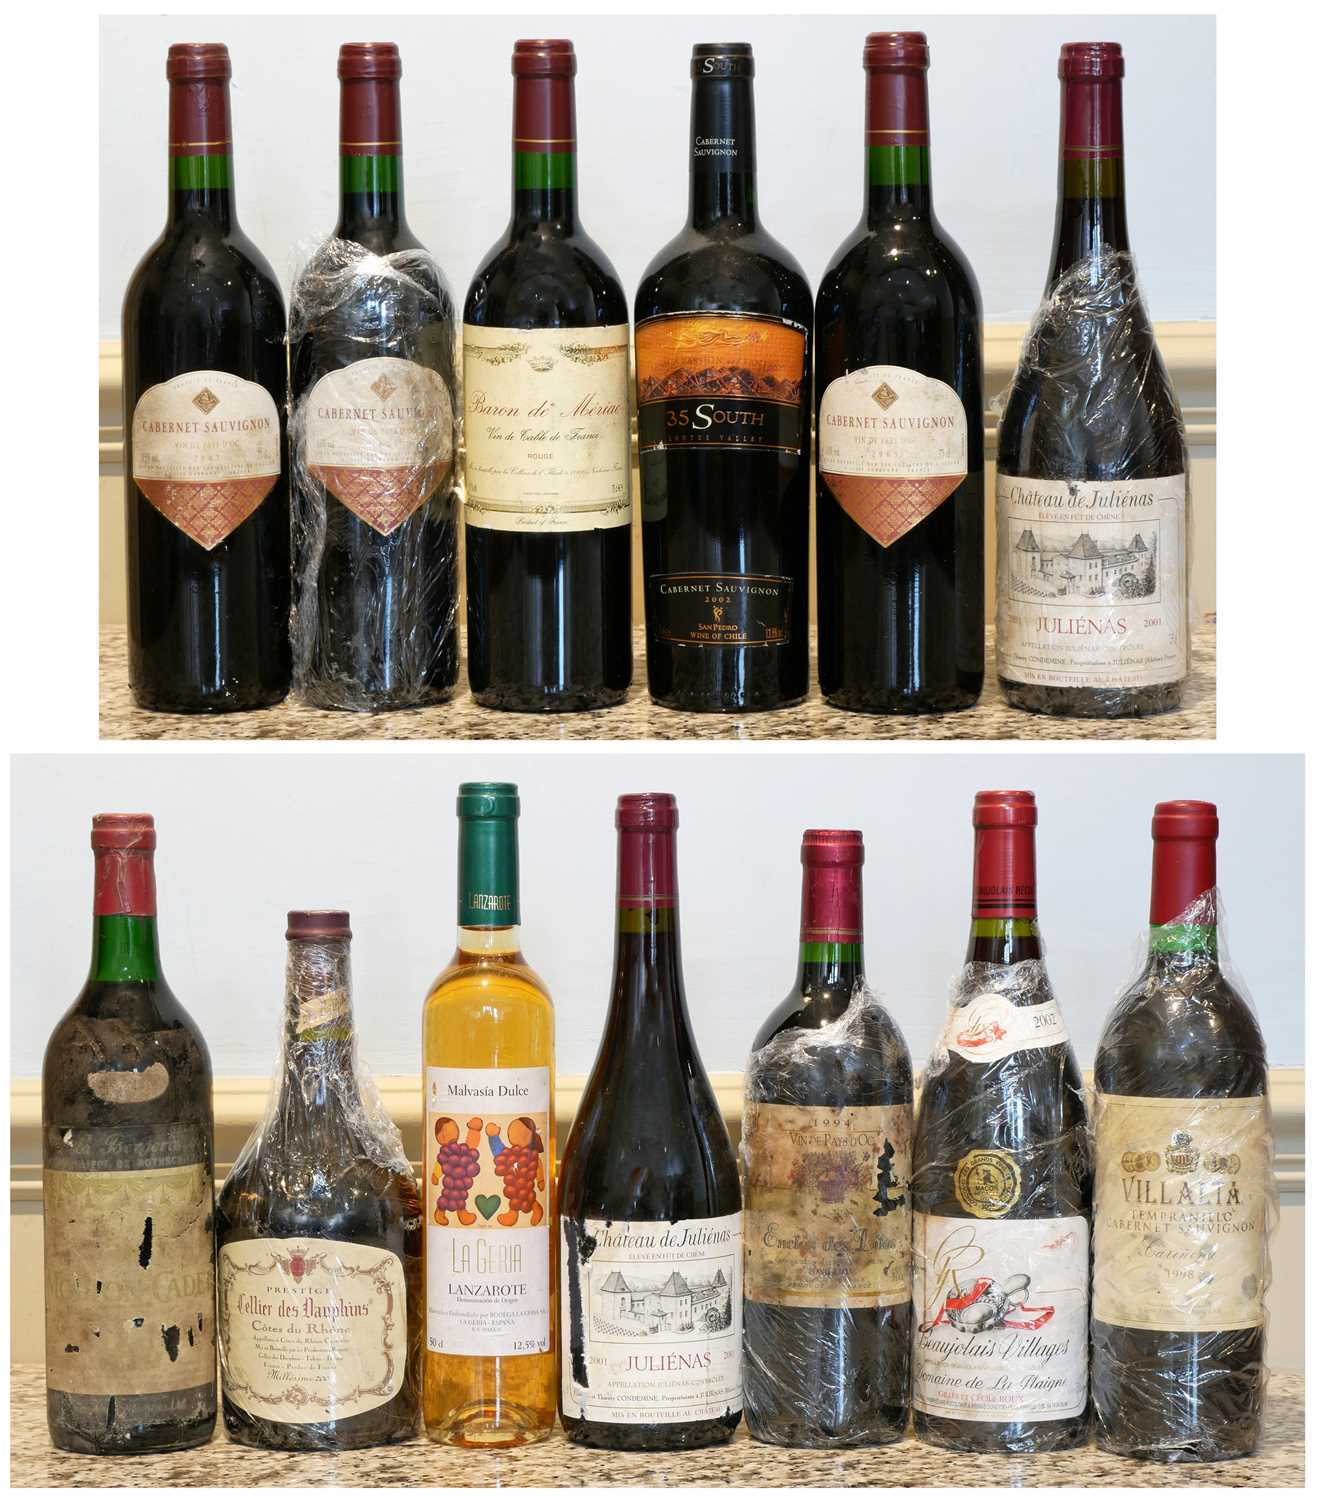 Lot 2 - 12 bottles Mixed Lot Assorted Red Table Wine plus 1 half bottle of Dessert Wine